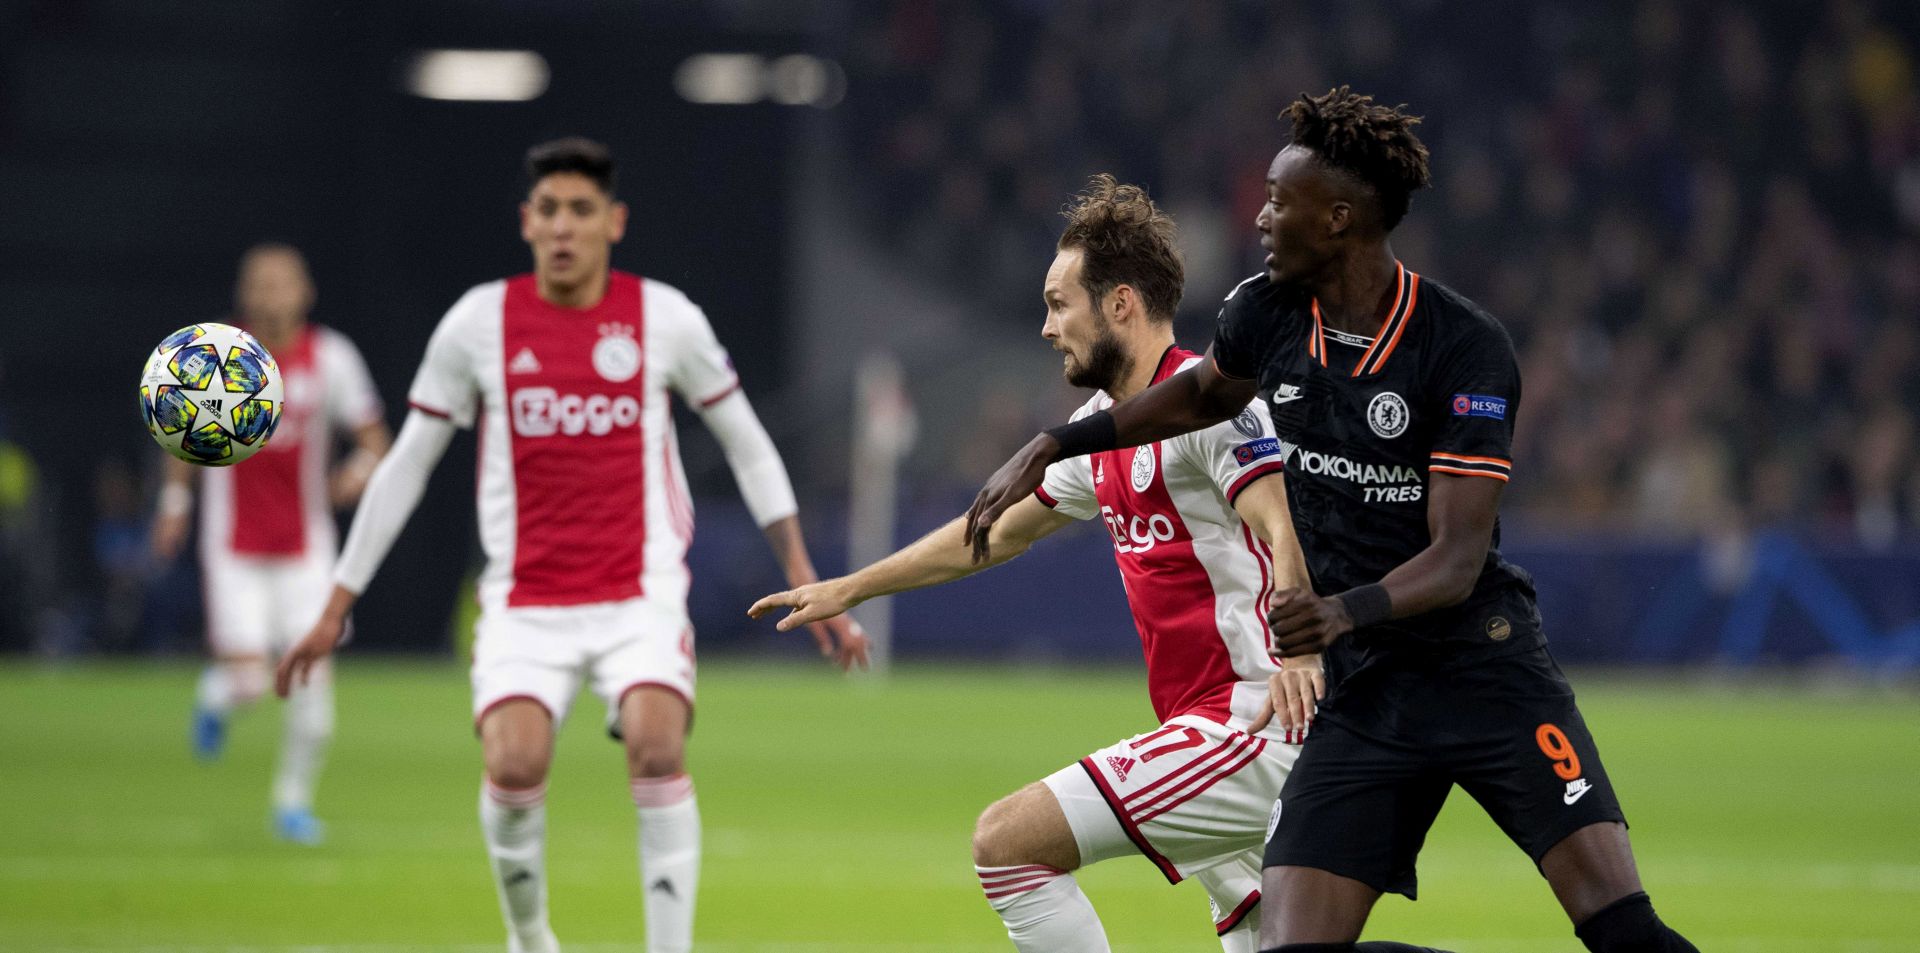 epa07943700 Daley Blind (C) of Ajax and Tammy Abraham (R) of Chelsea FC in action during the UEFA Champions League group H soccer match between Ajax and Chelsea in Amsterdam, the Netherlands, 23 October 2019.  EPA/OLAF KRAAK